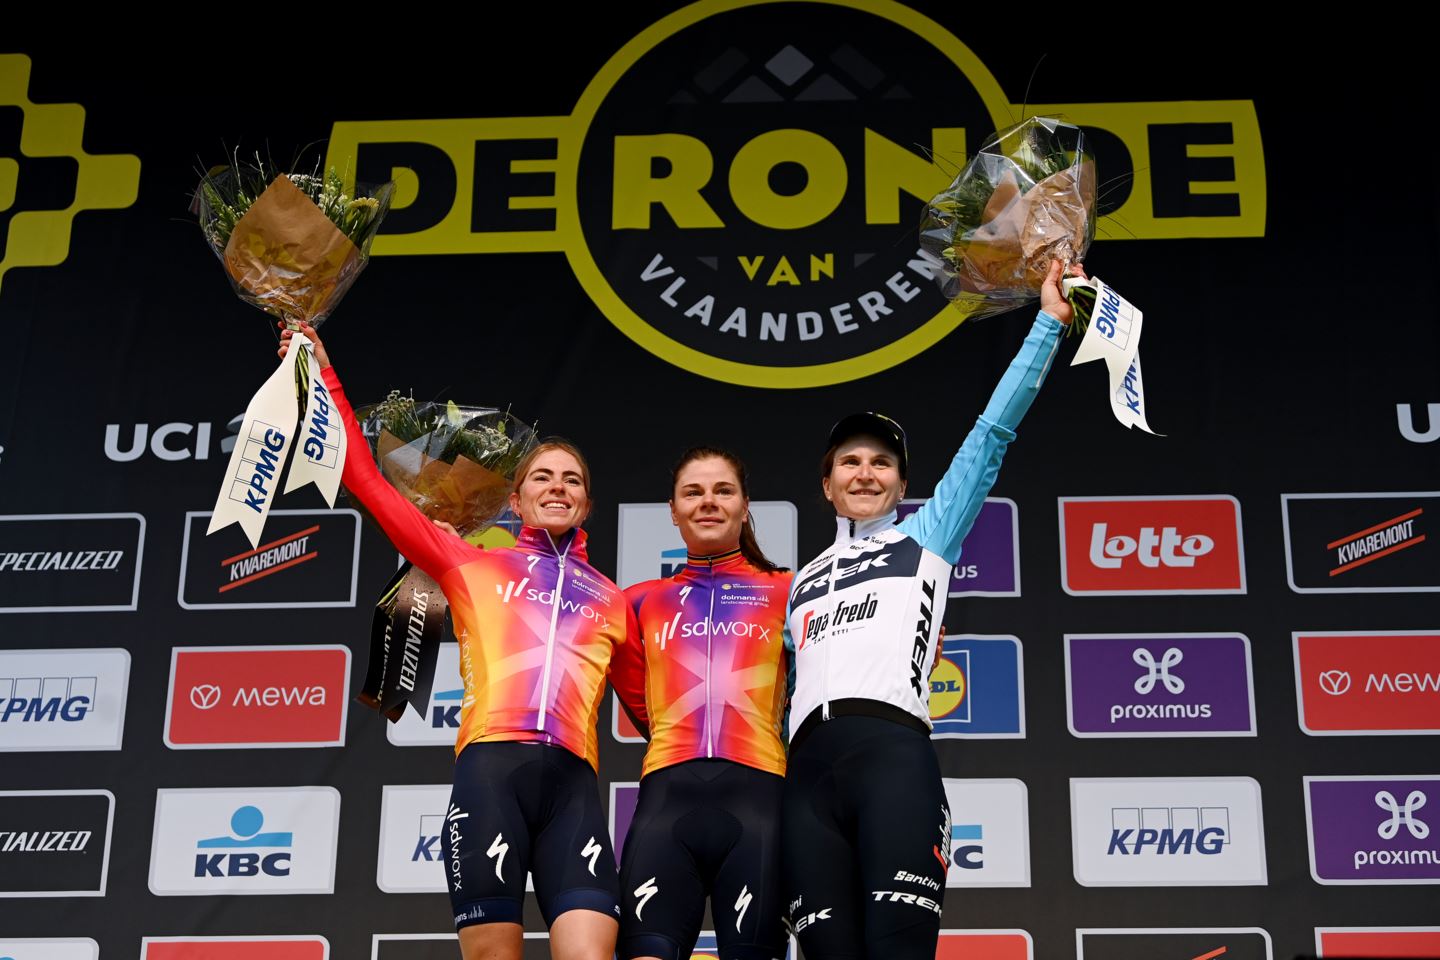 The podium at the Tour of Flanders 2023.